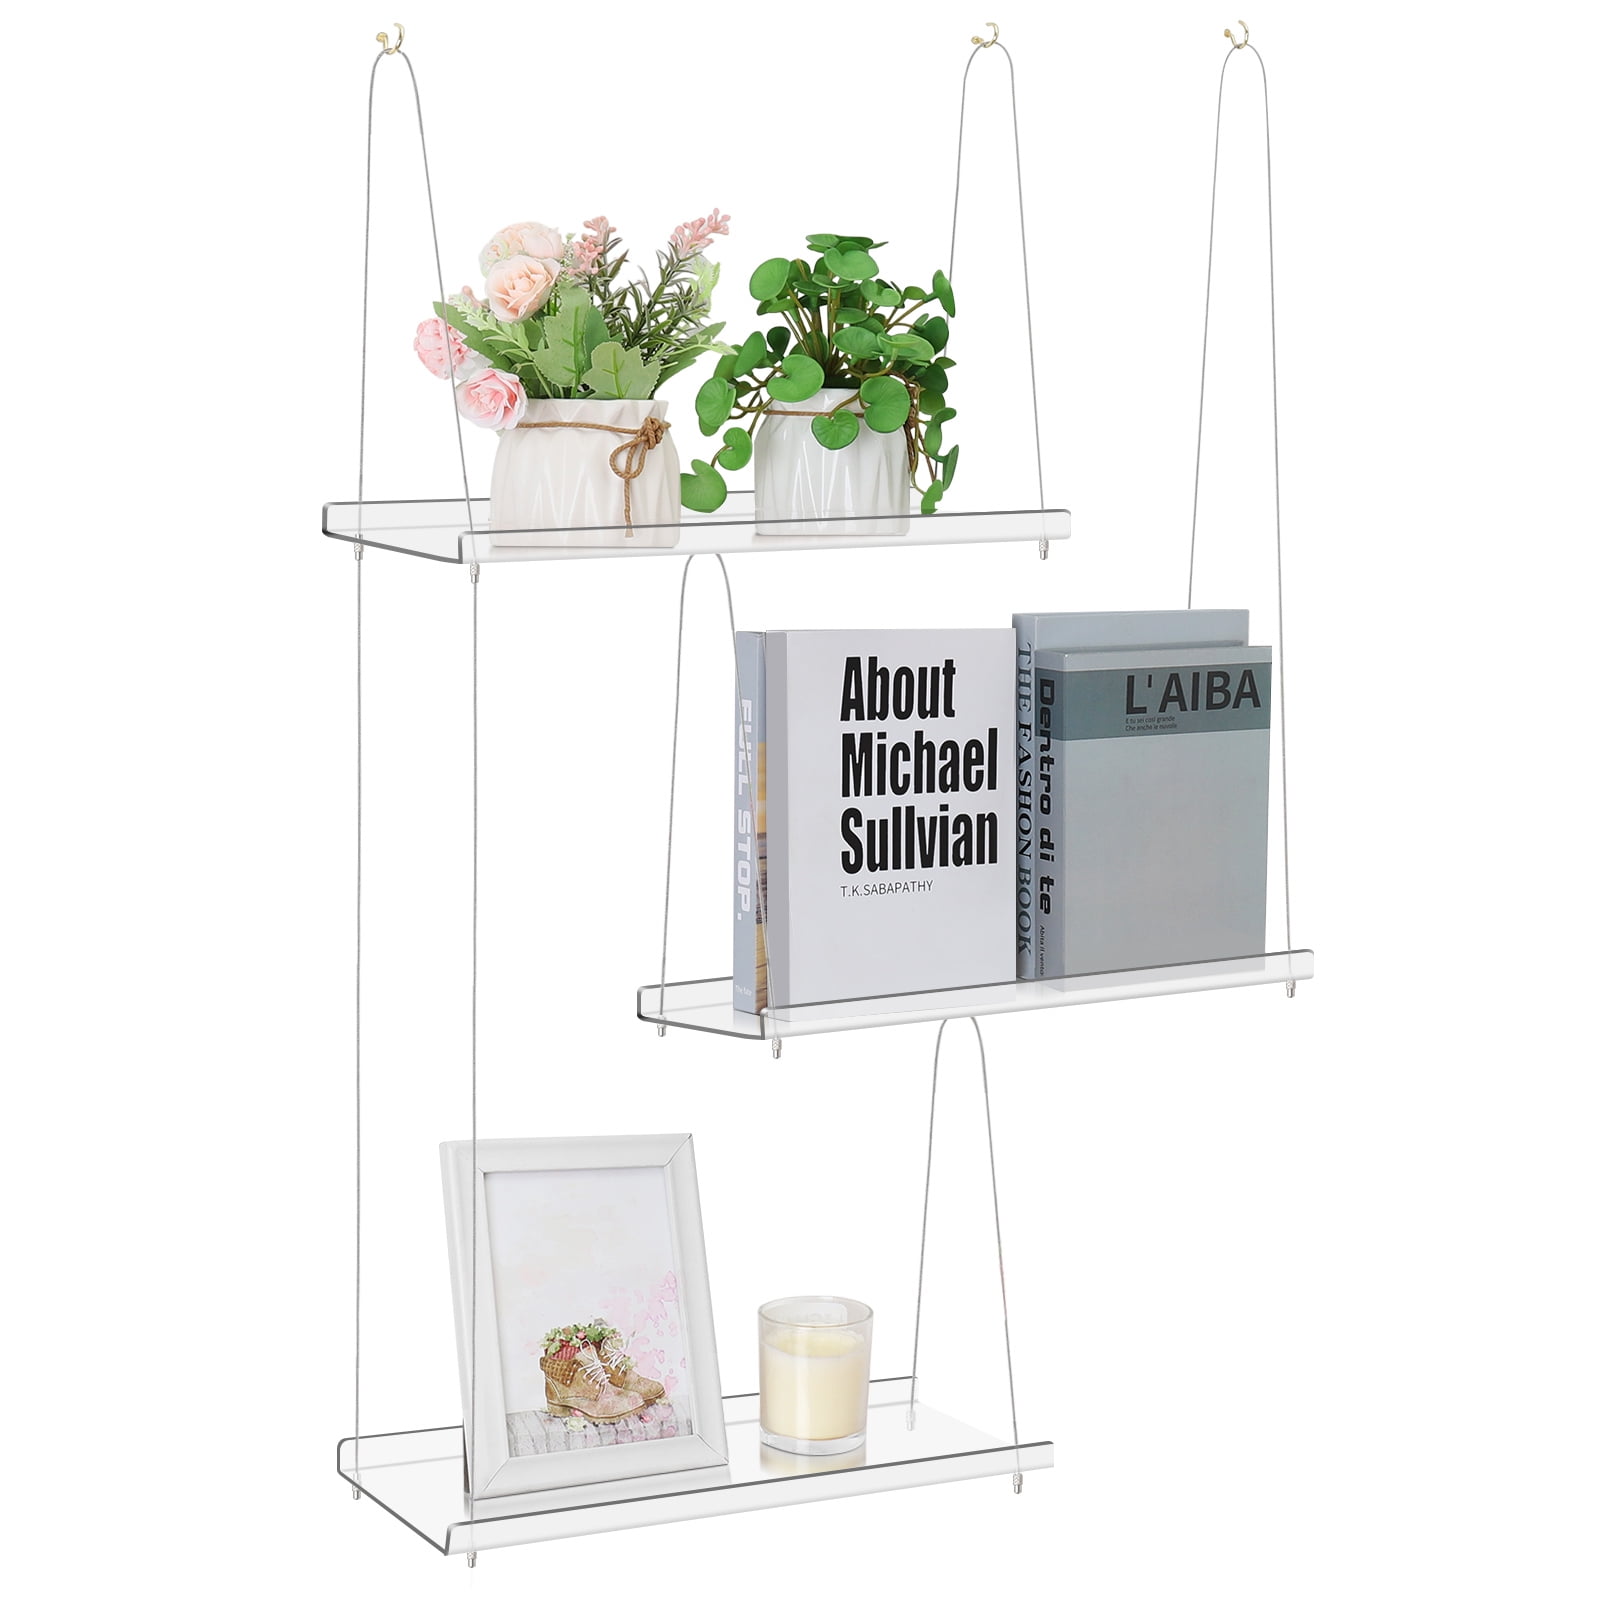 LaBrinx Designs Suction Cup Shelf - Live Plants, Windows, and Bathrooms, Size: Medium - 2 Pack